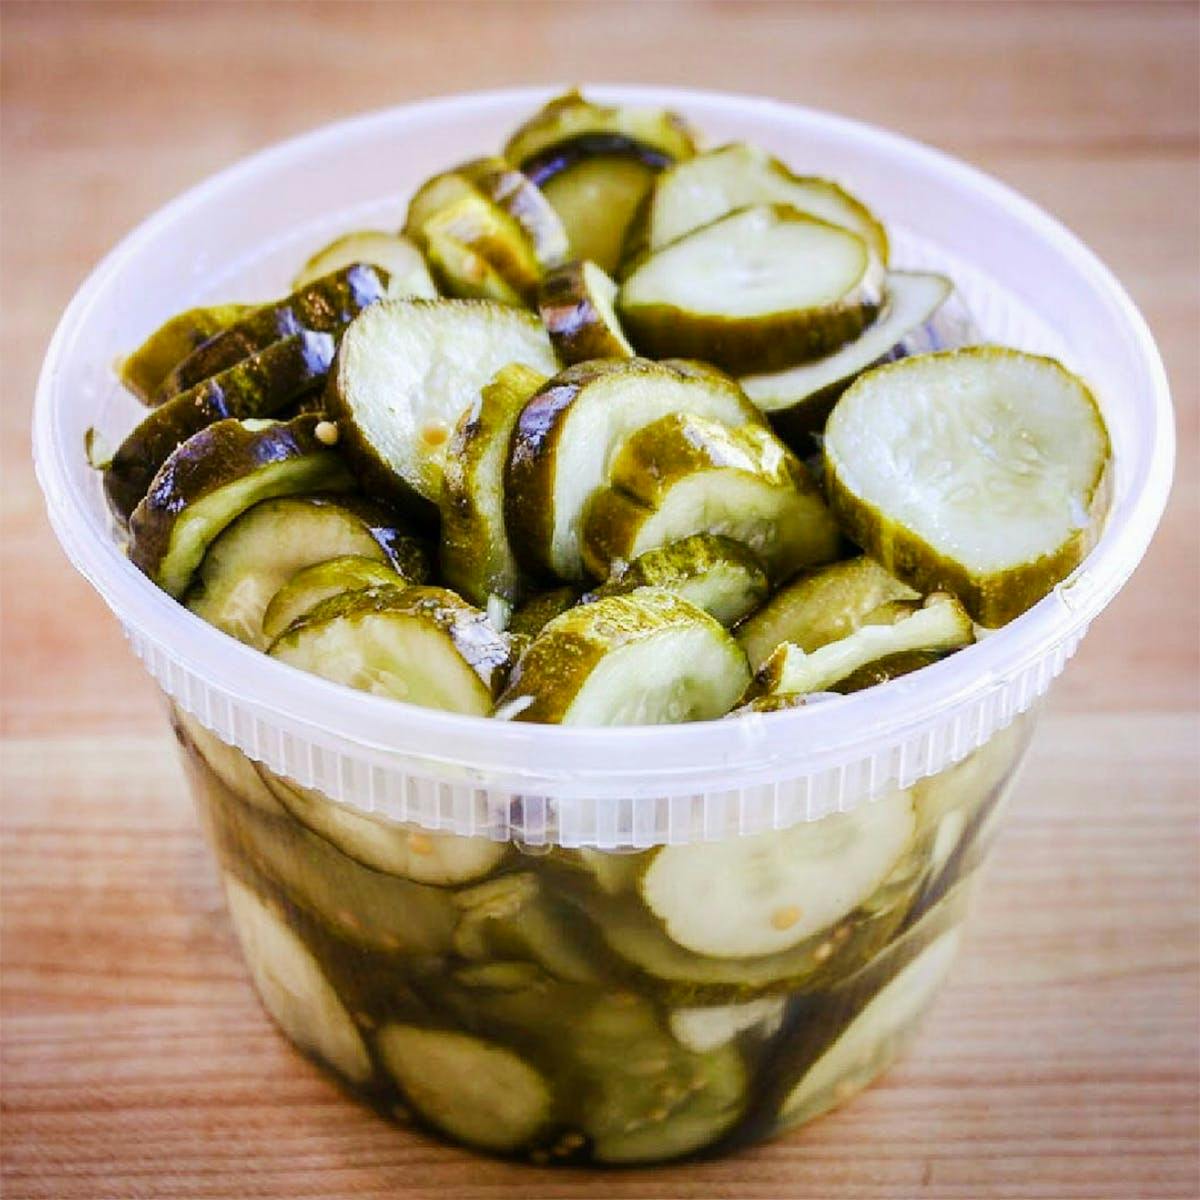 Pickled Hot Tomatoes – The Pickle Guys